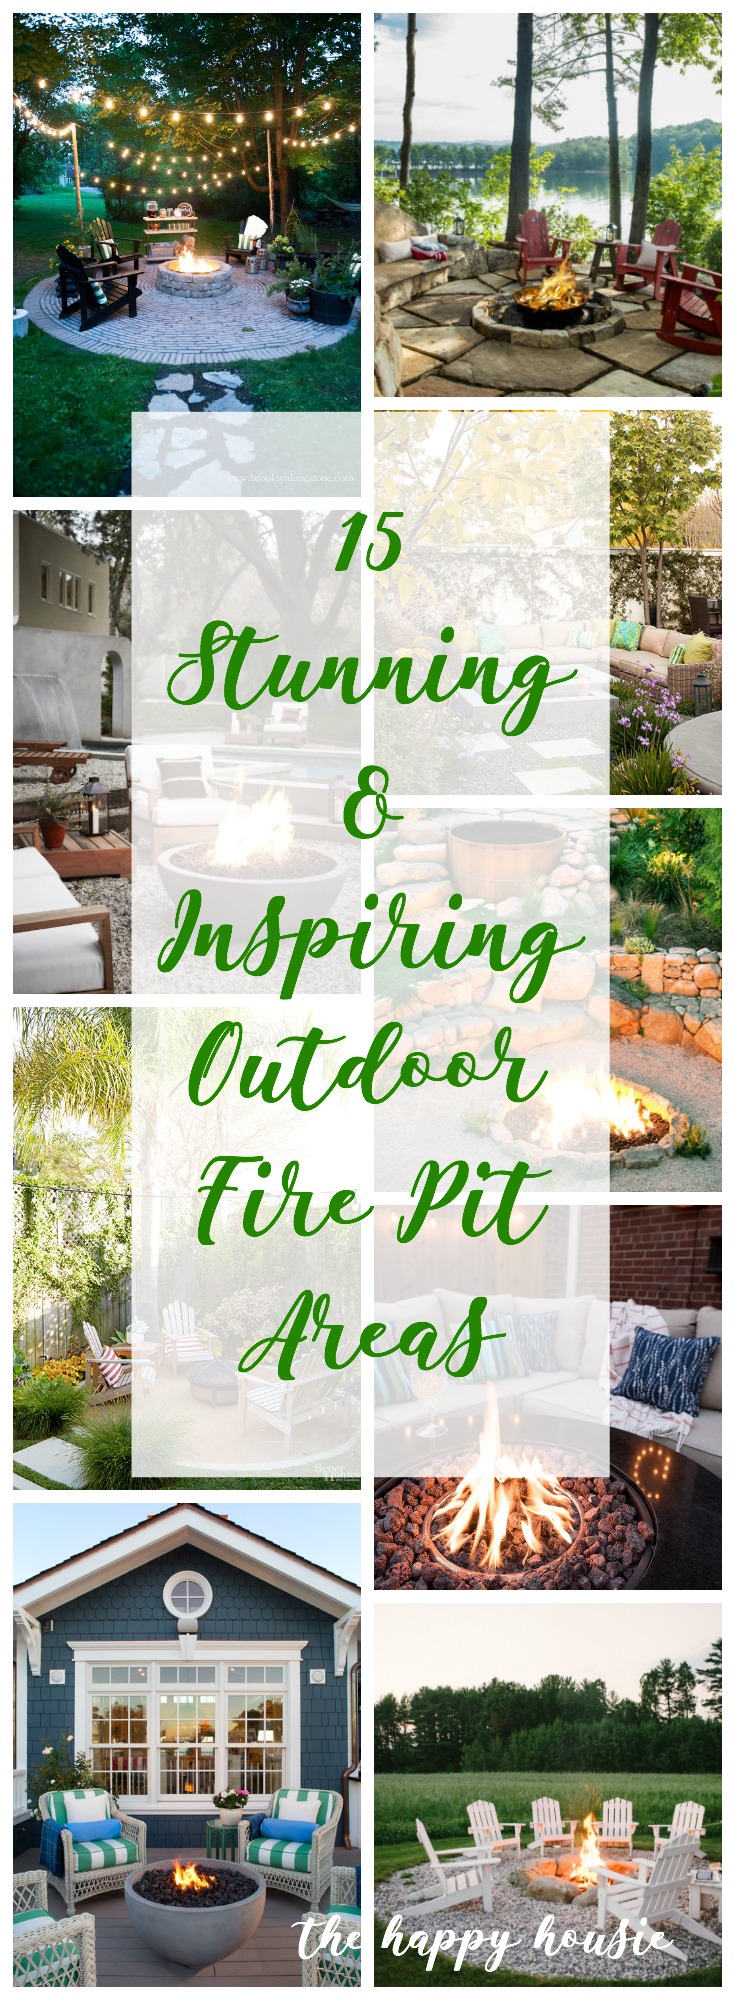 15 stunning and inspiring outdoor fir pit areas graphic.